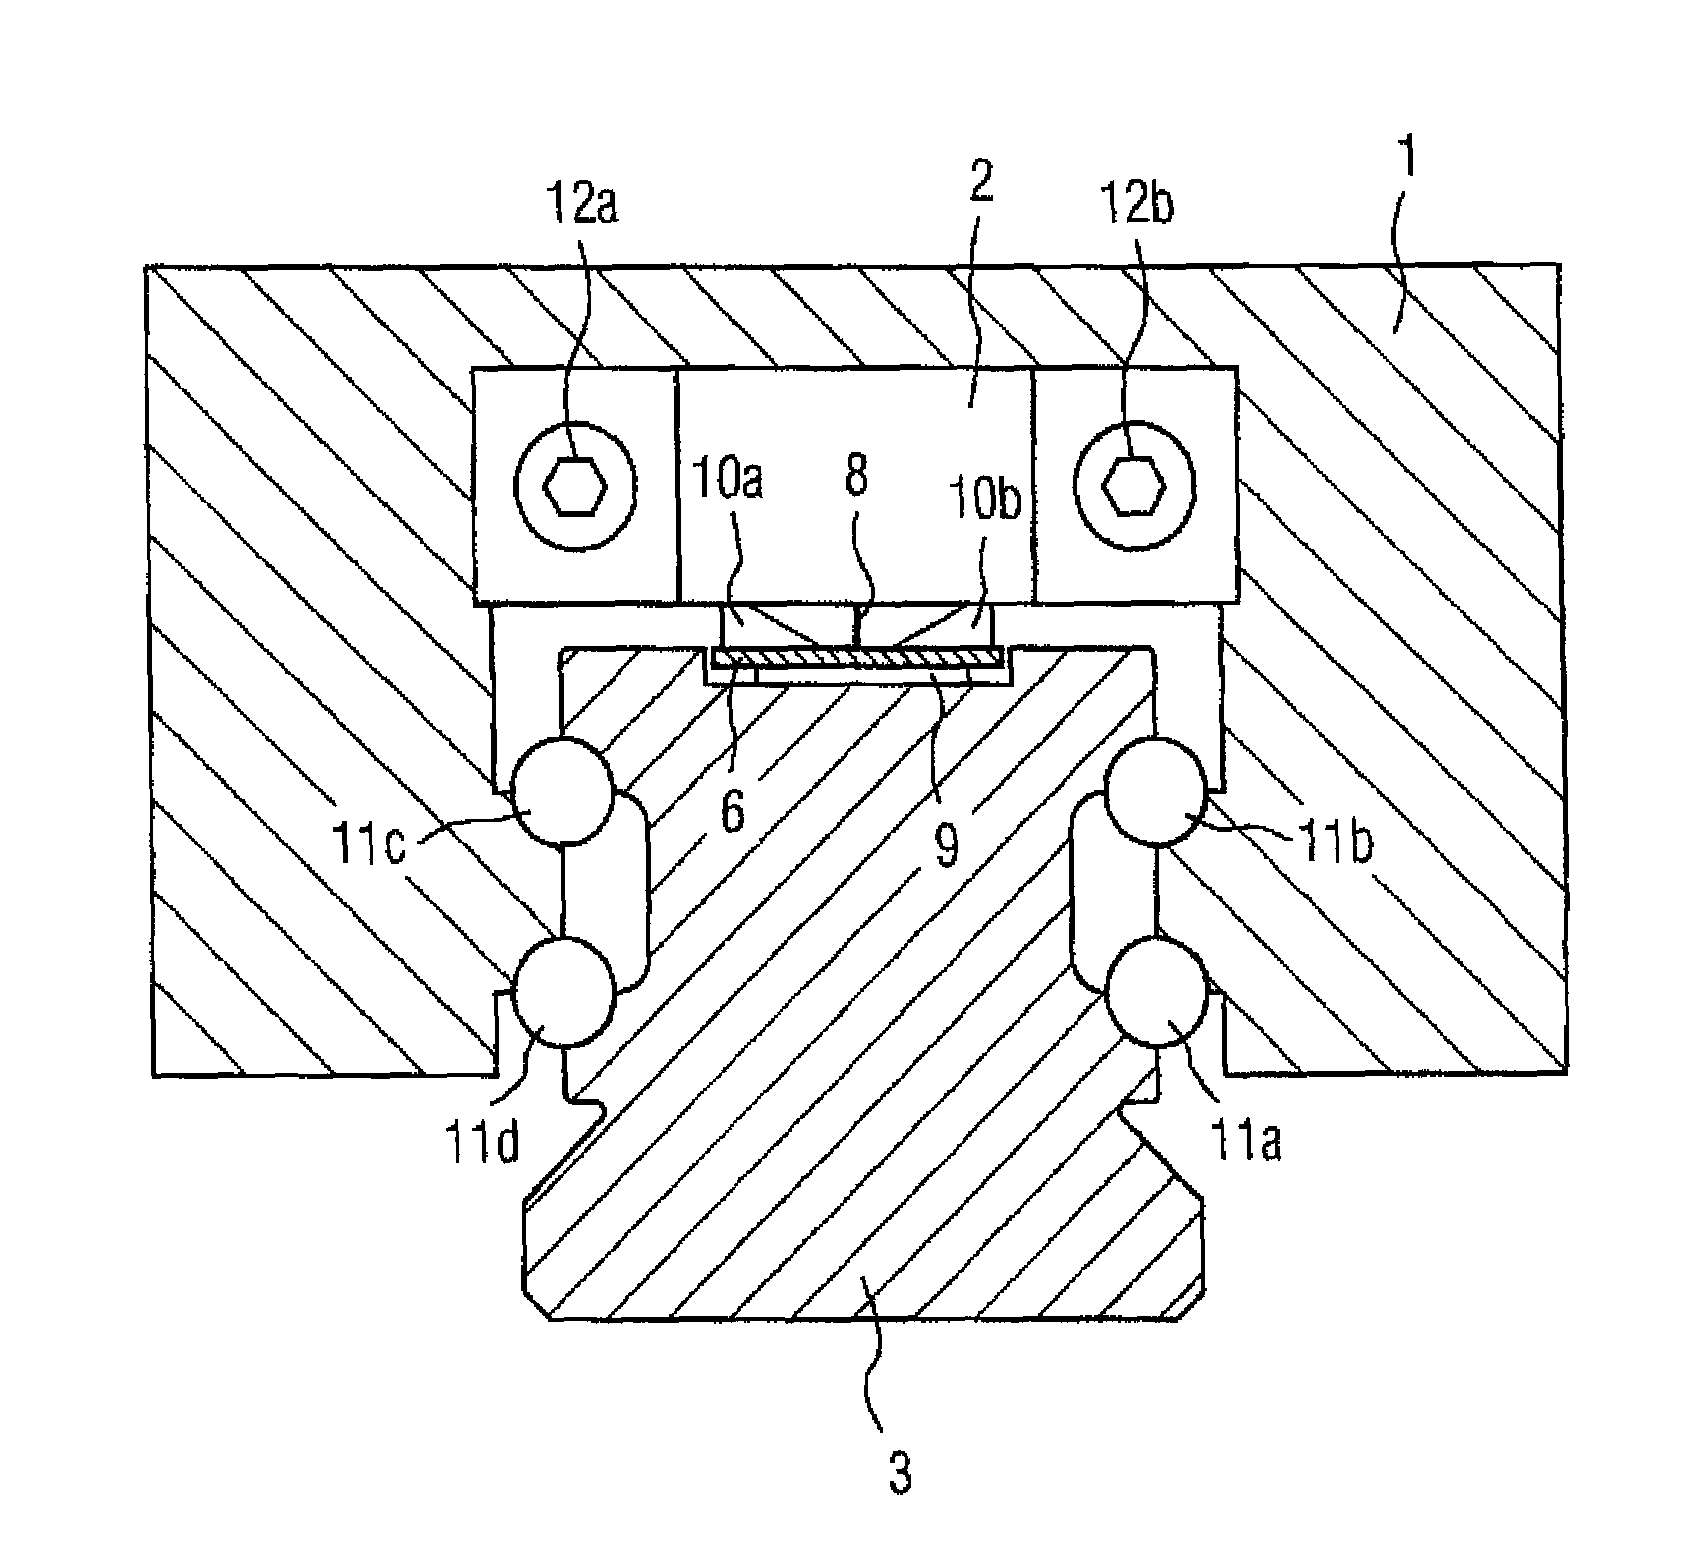 Guiding device with measuring scale for guiding a moveable machine element of a machine